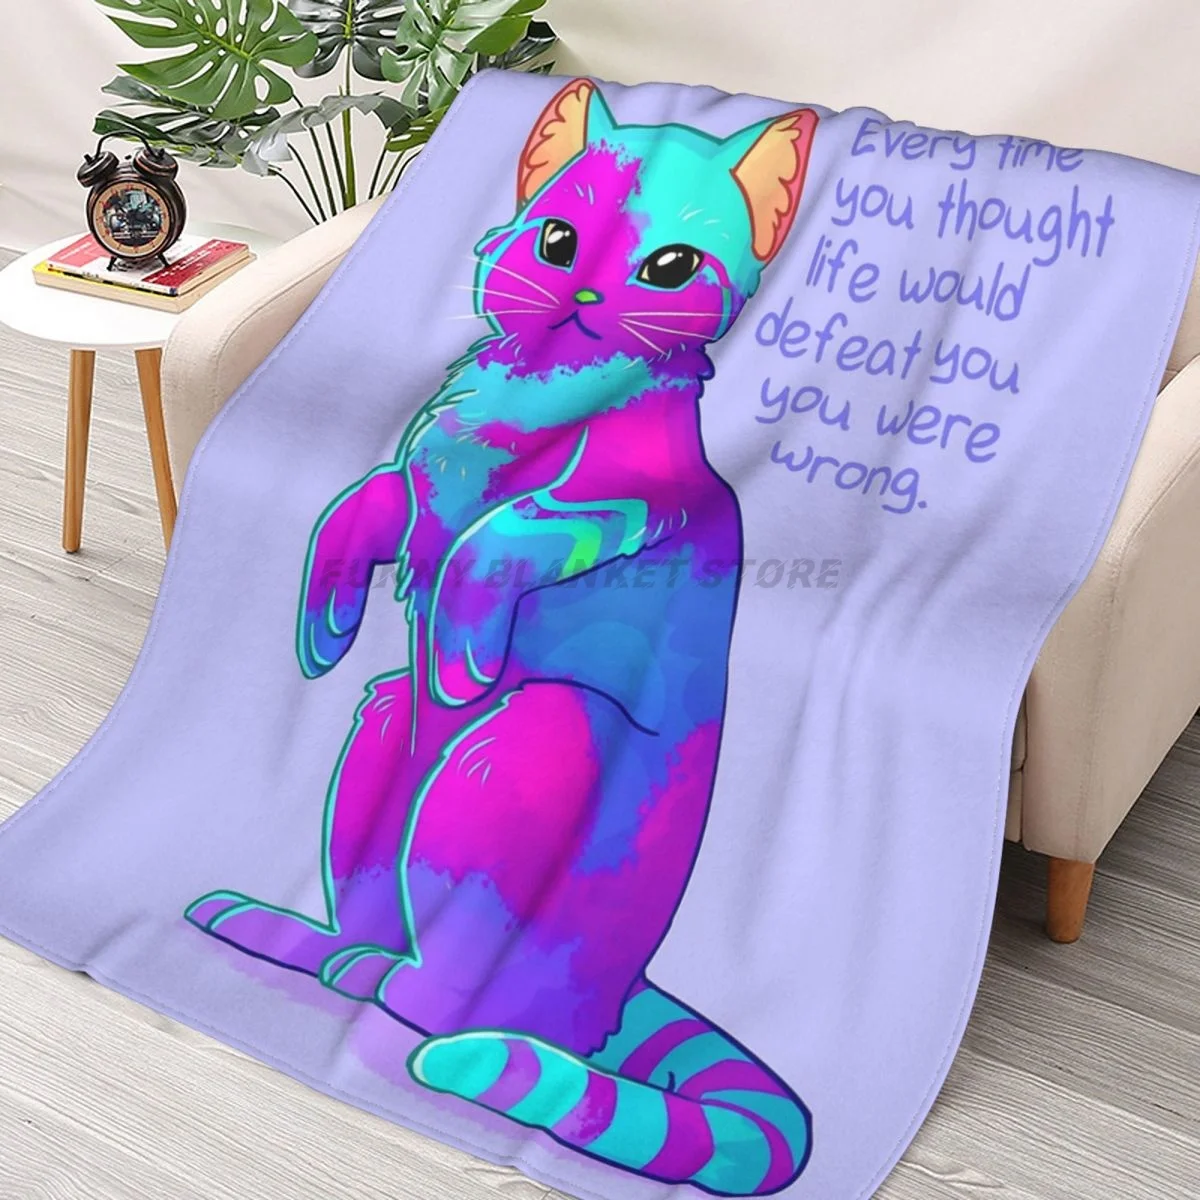 

Every Time You Thought Life Would Defeat You Rainbow Sky Sand Cat Throws Blankets Collage Flannel Ultra-Soft Warm picnic blanket